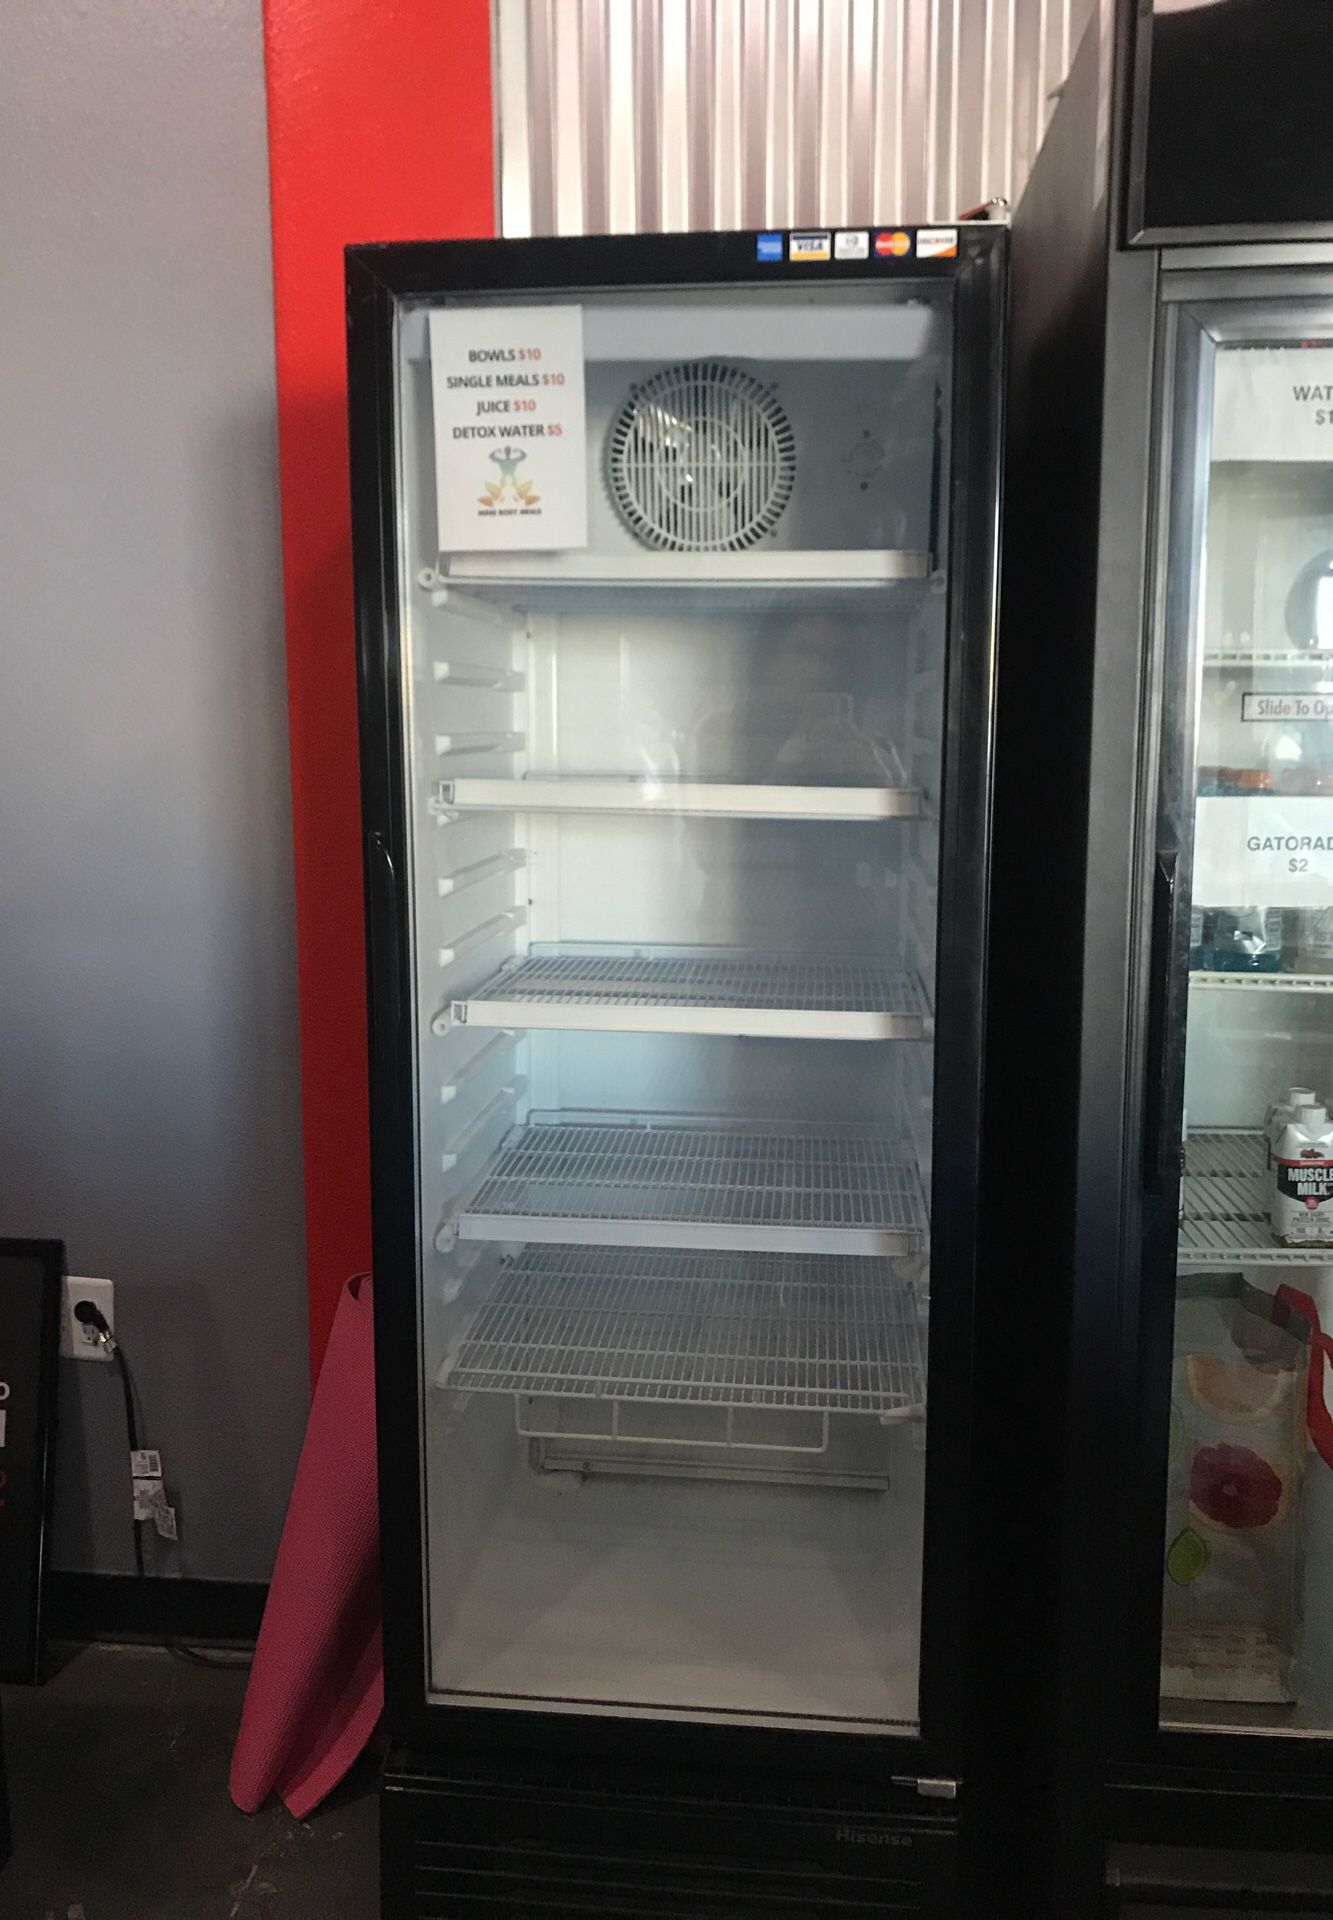 Retail Fridge/cooler - works perfectly